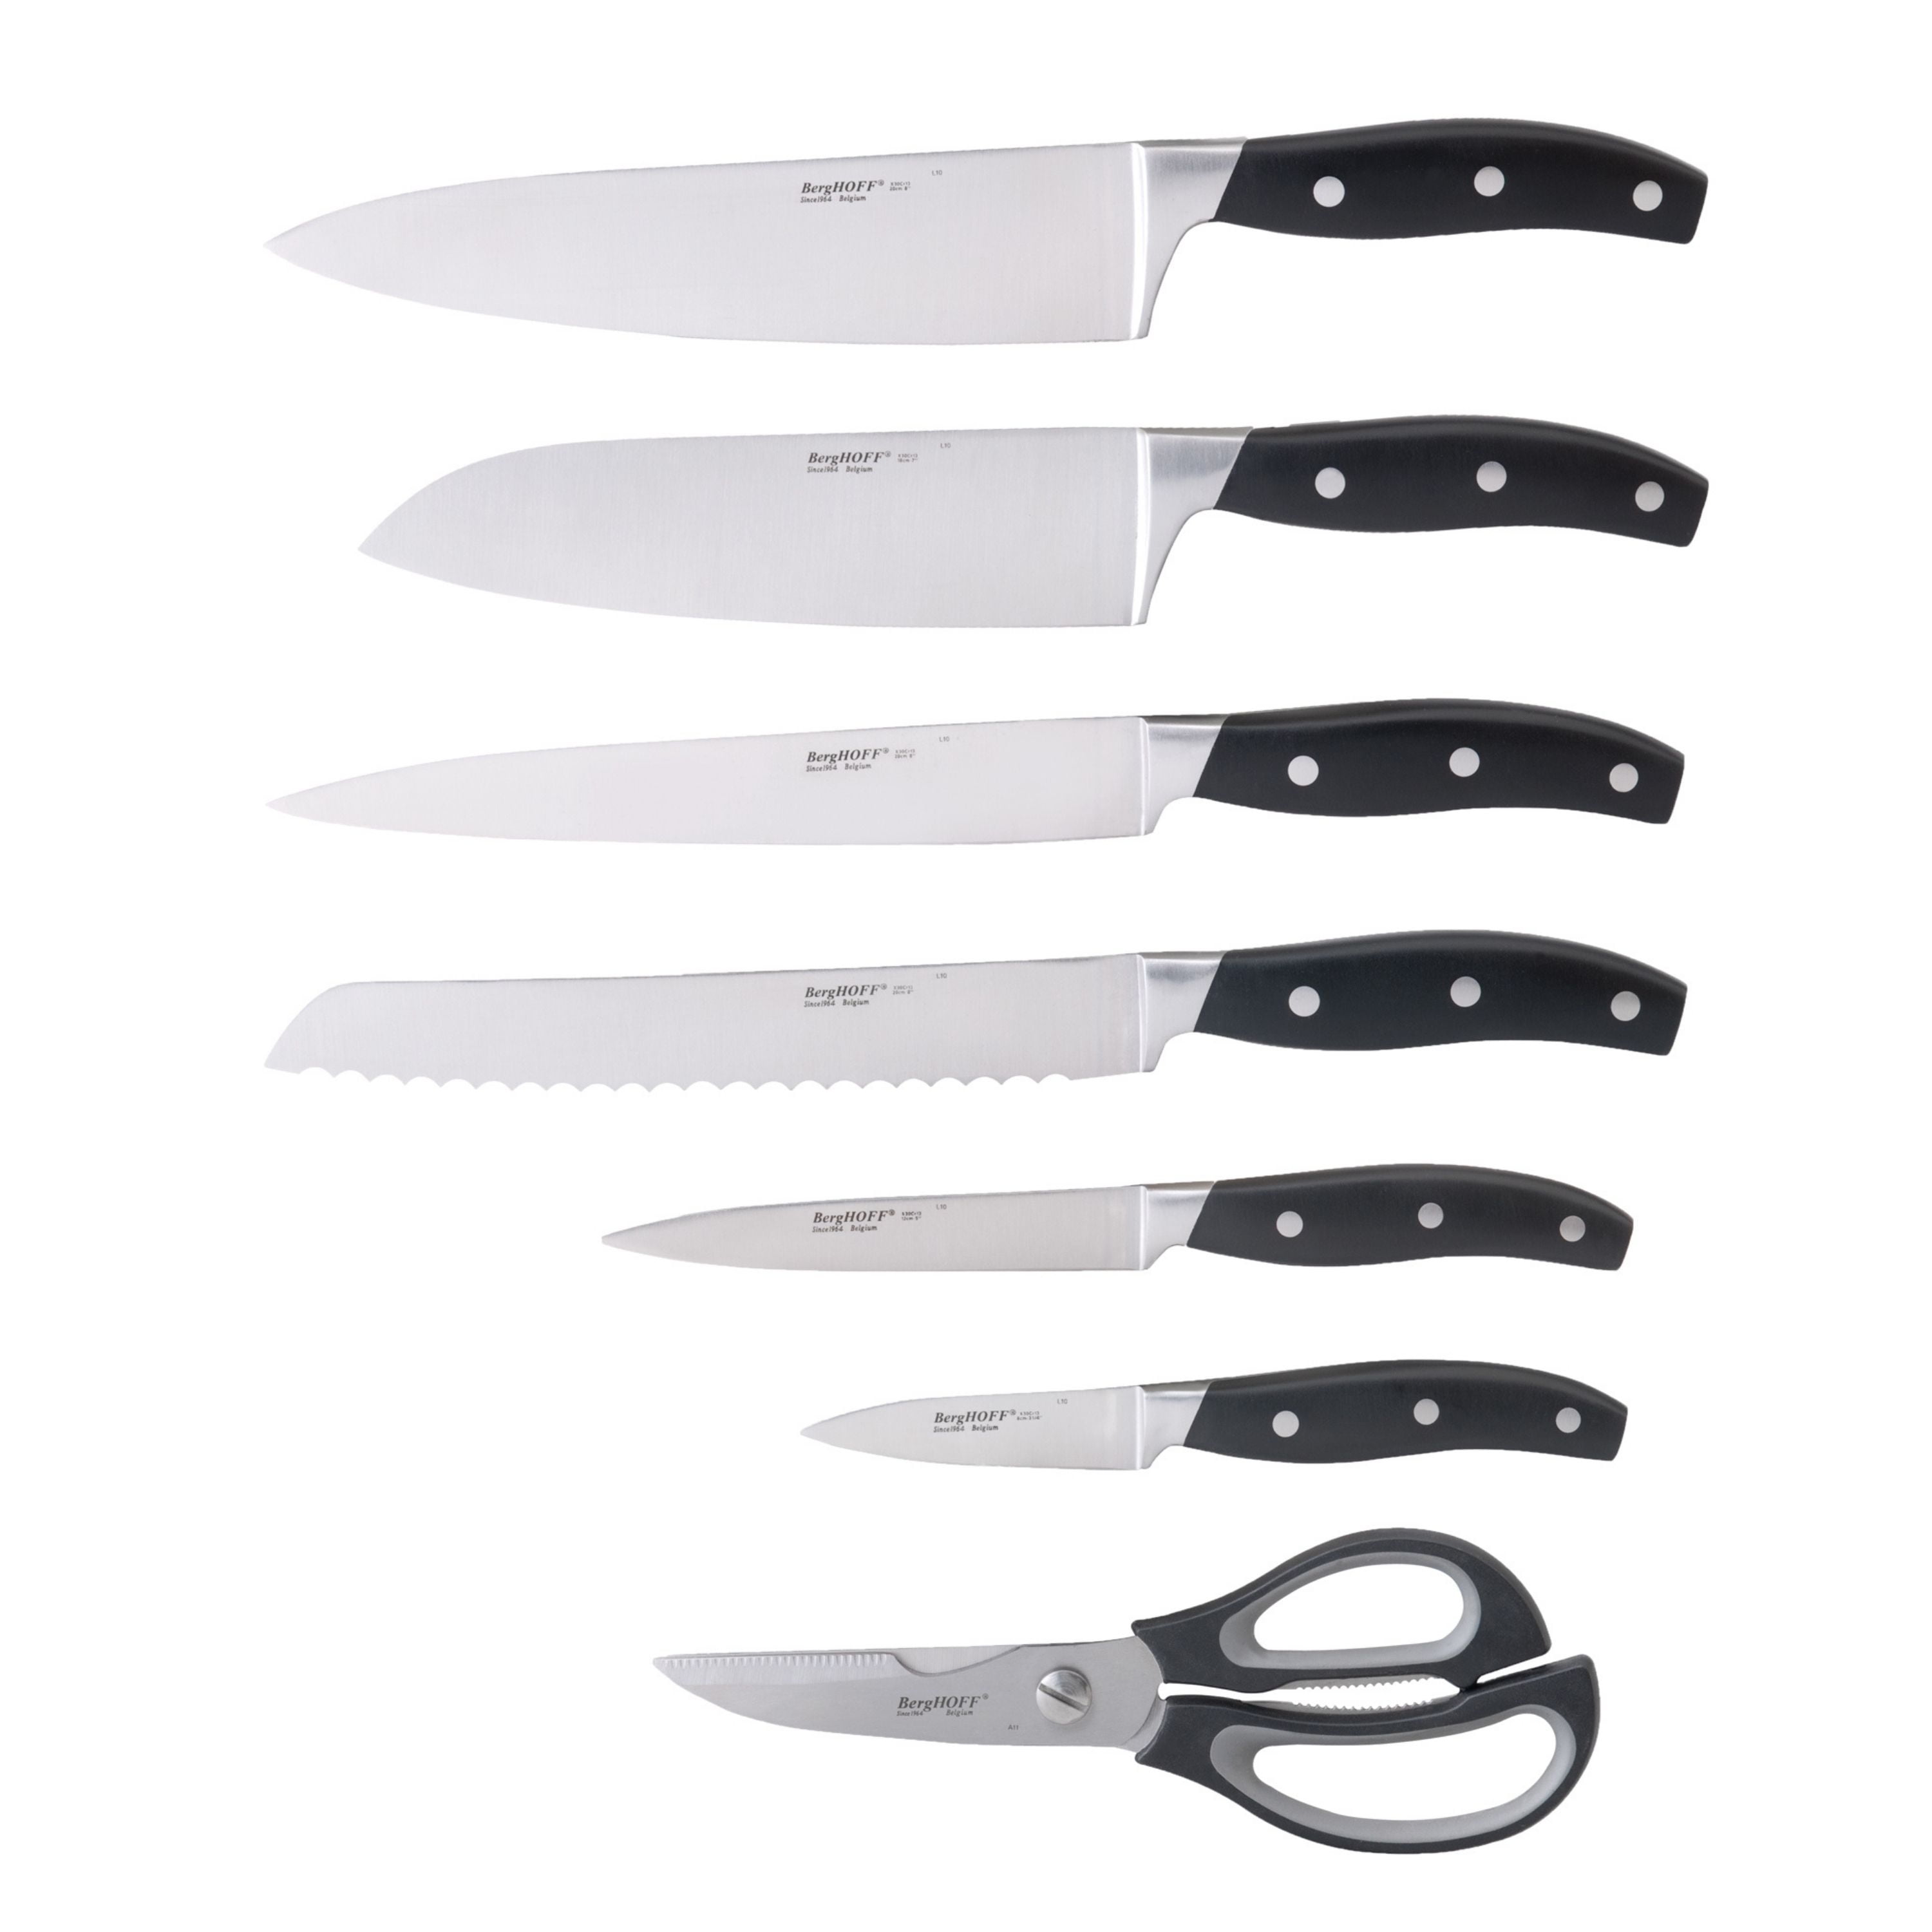 Fini Cutlery 8 Piece Knives Set with Block for Kitchen - Forged German Steel, Hand Sharpened, Patented Short Handle Design